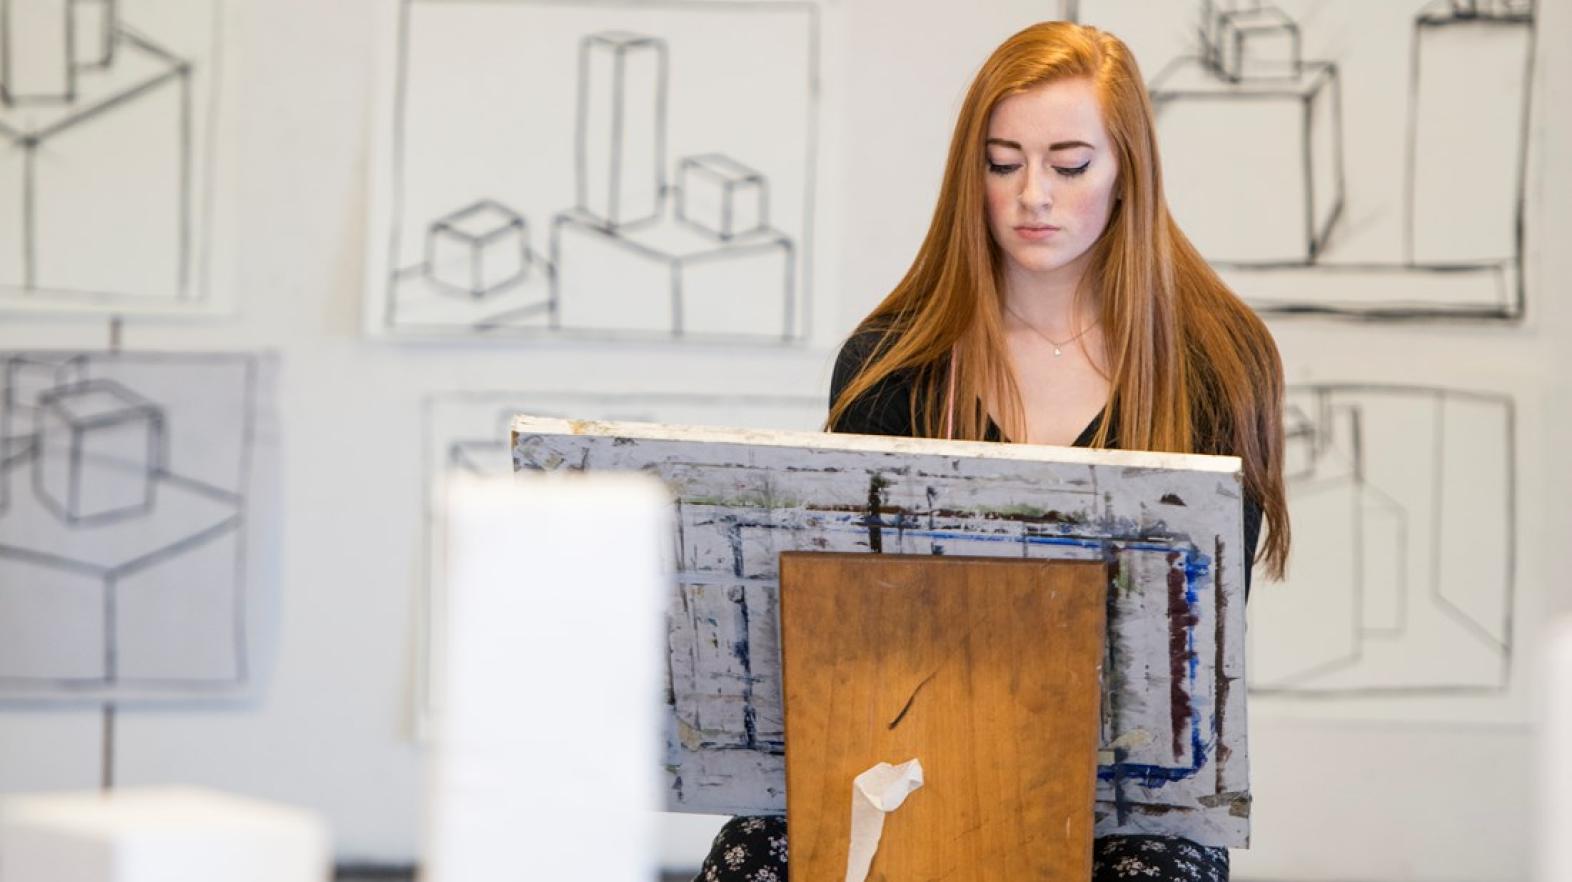 Young woman uses art studio space to create art